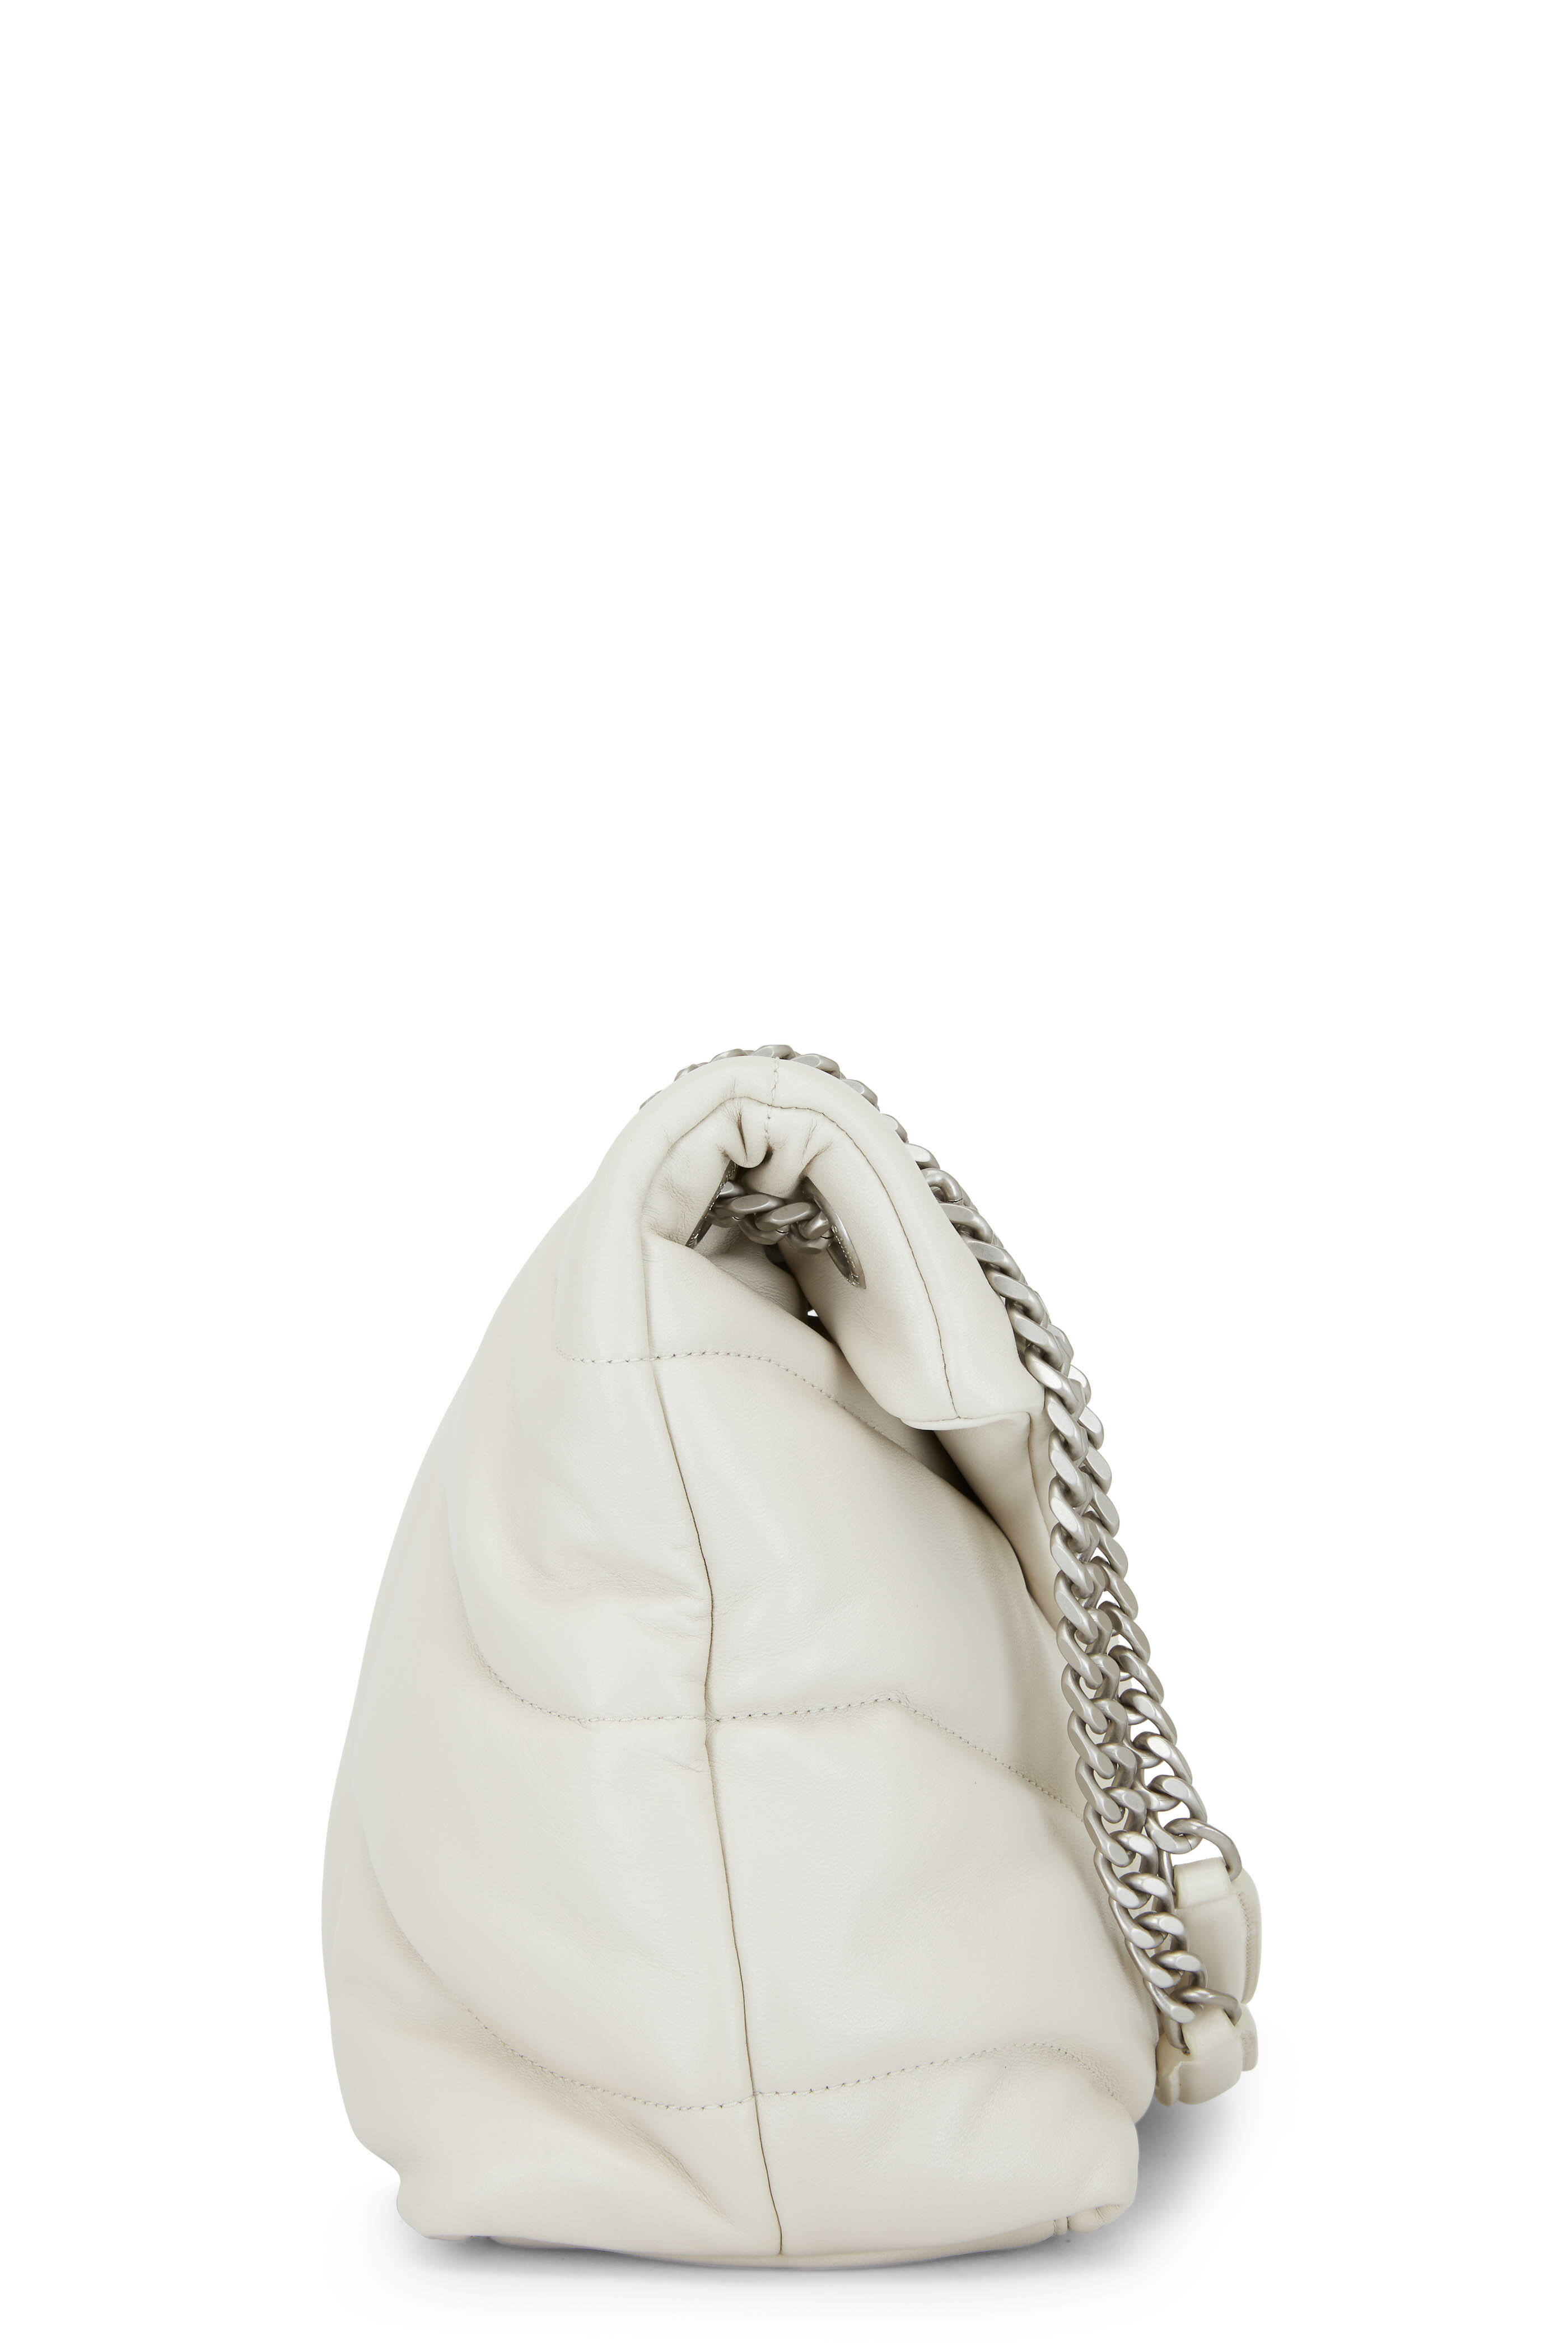 Saint Laurent Monogram Quilted Leather Pouch In Crema Soft